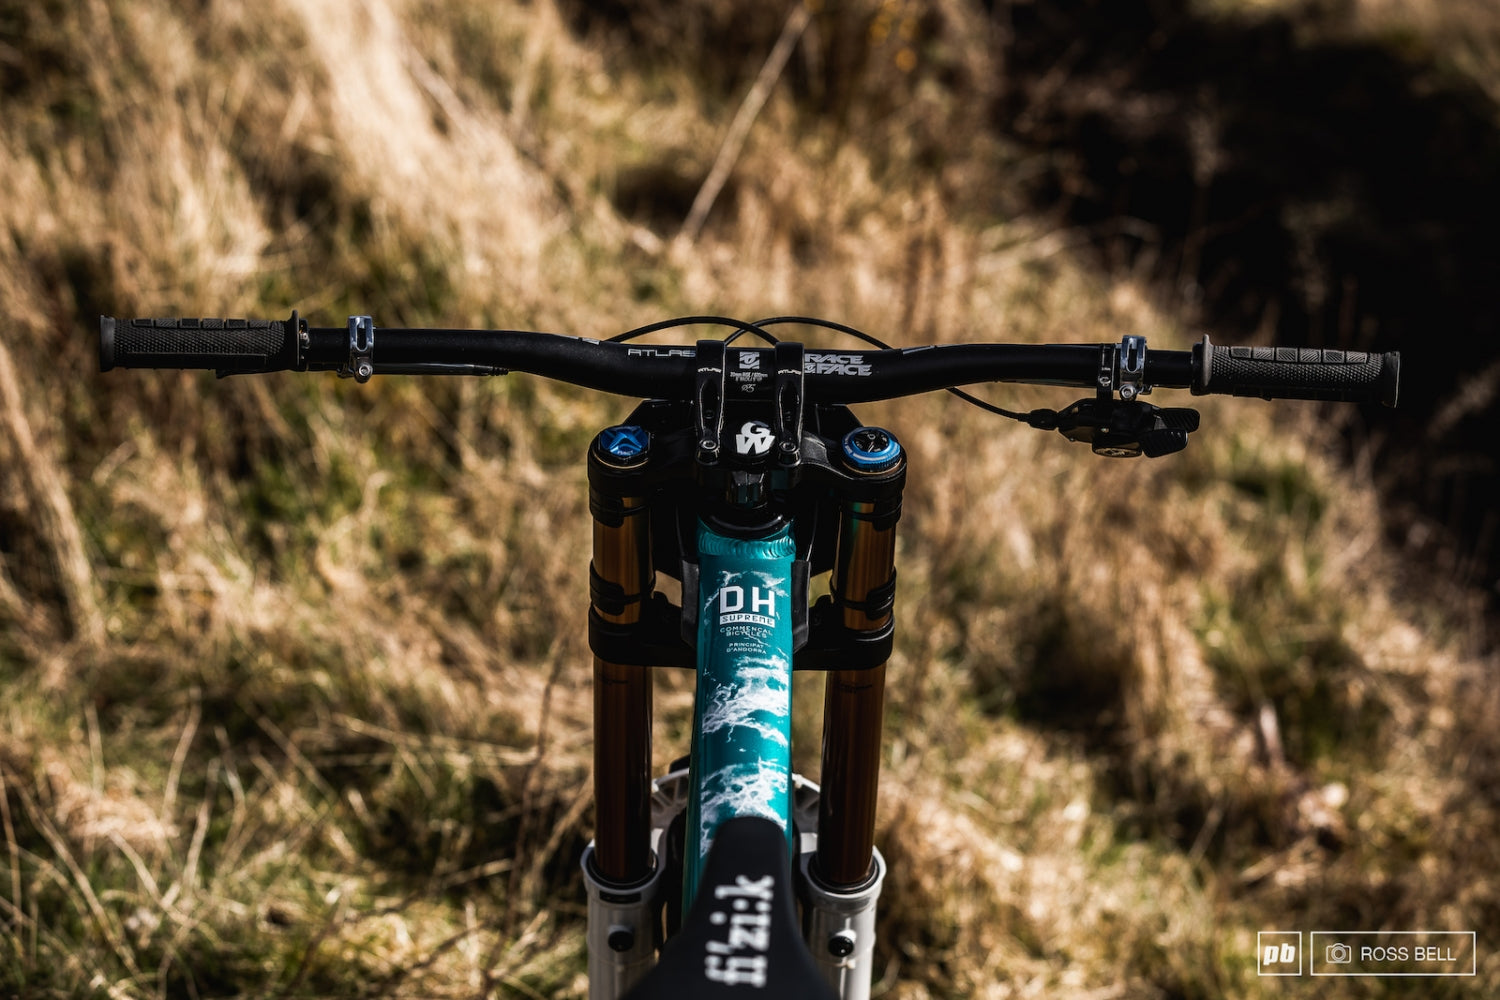 Commencal Supreme DH with Greg Williamson and Pinkbike